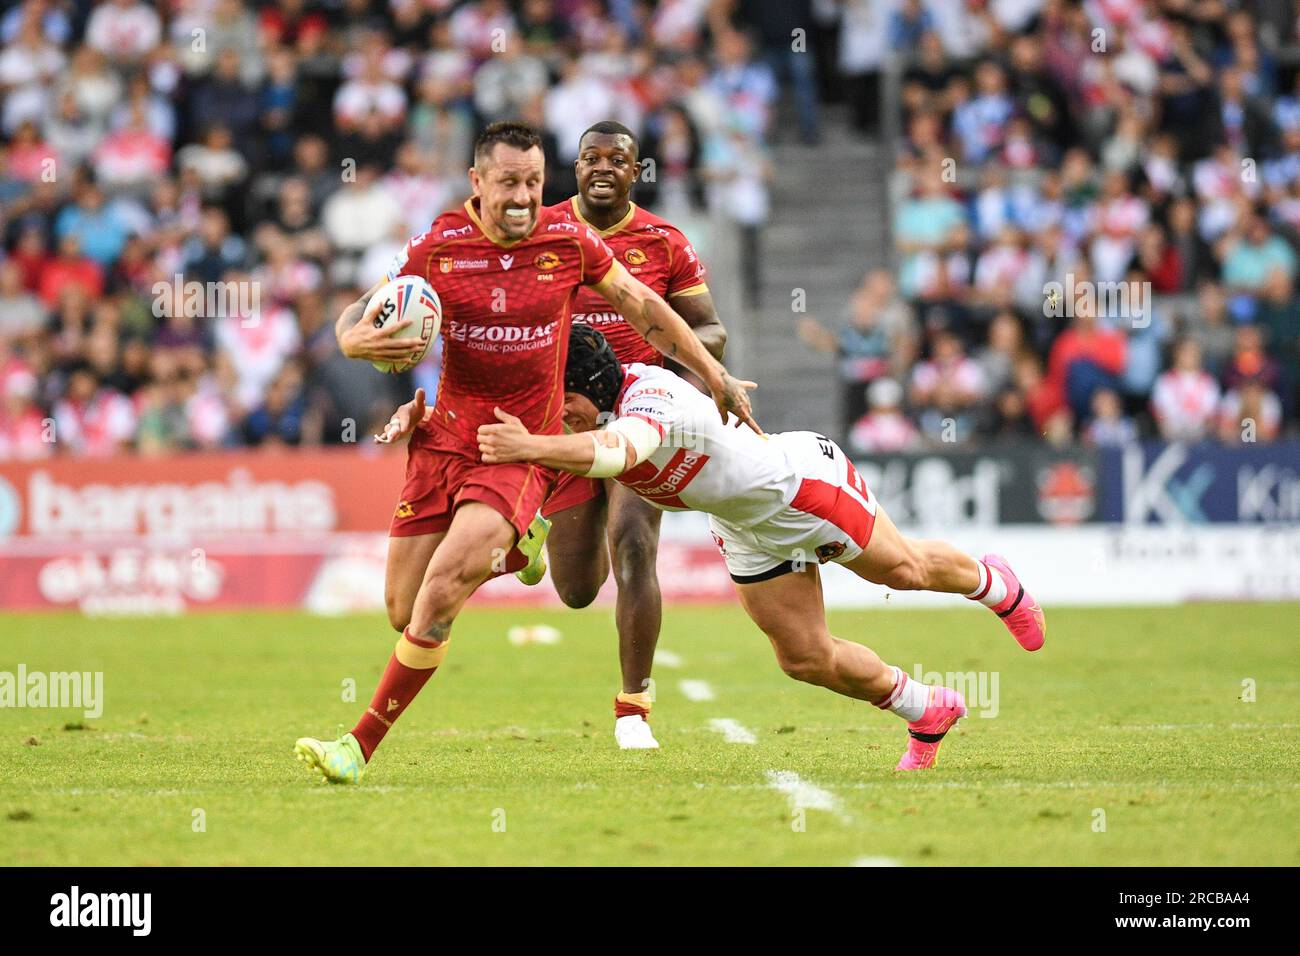 St. Helens, Angleterre - 13 juillet 2023 - Mitchell Pearce de Catalan Dragons fait une pause. Betfred Super League, St. Helens vs Catalan Dragons au Totally Wicked Stadium, St. Helens, Royaume-Uni Banque D'Images